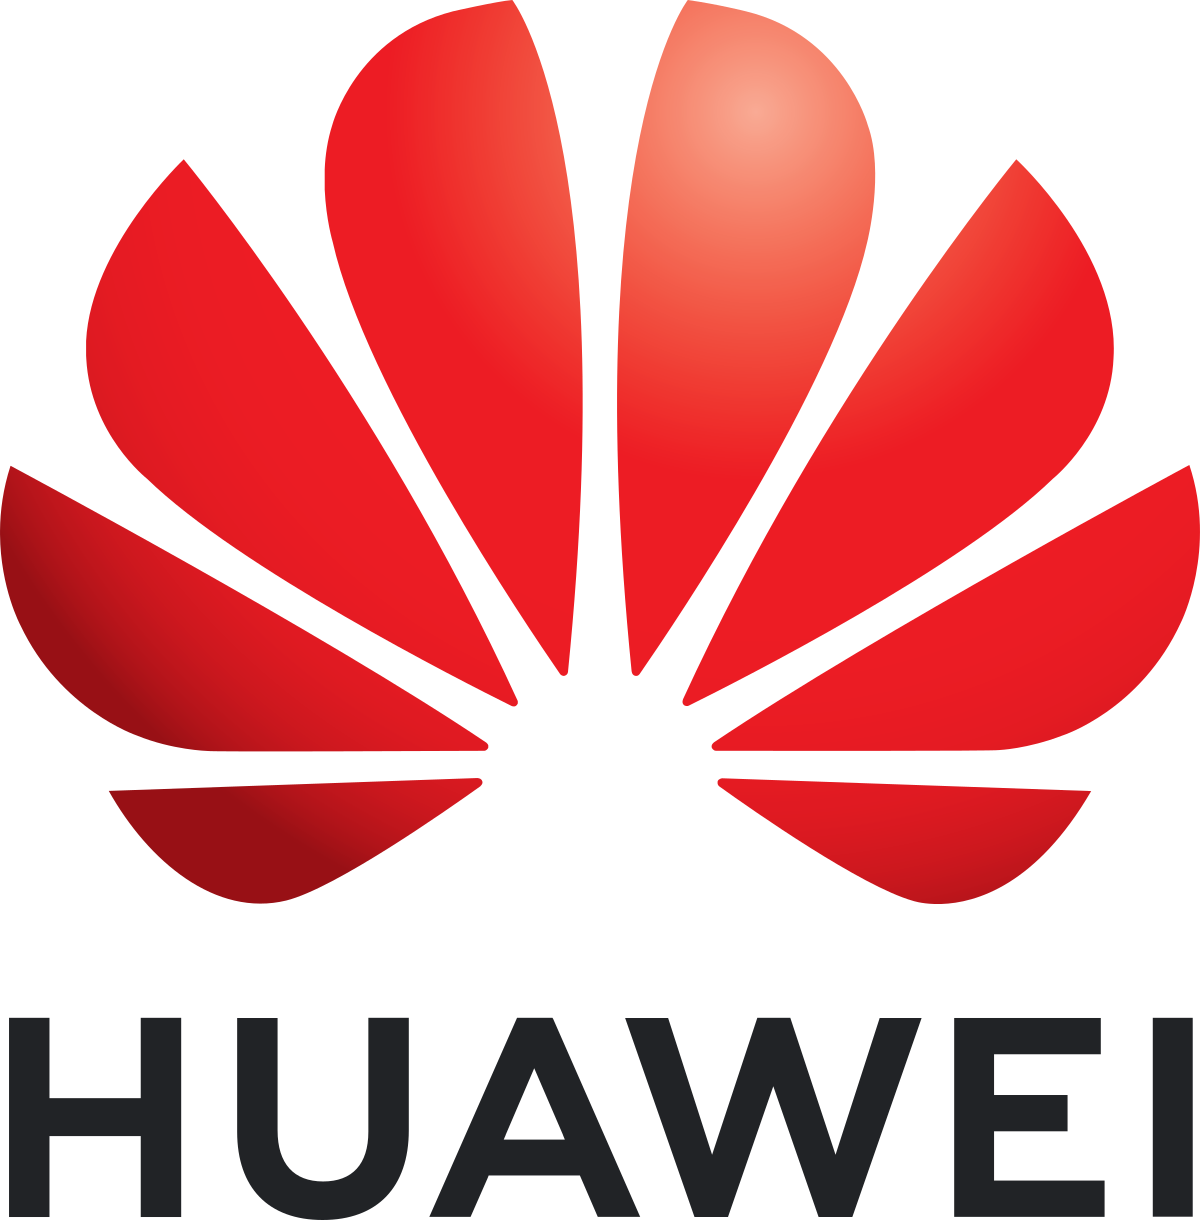 Huawei unveils 5G chips, devices - THE SECOND OPINION